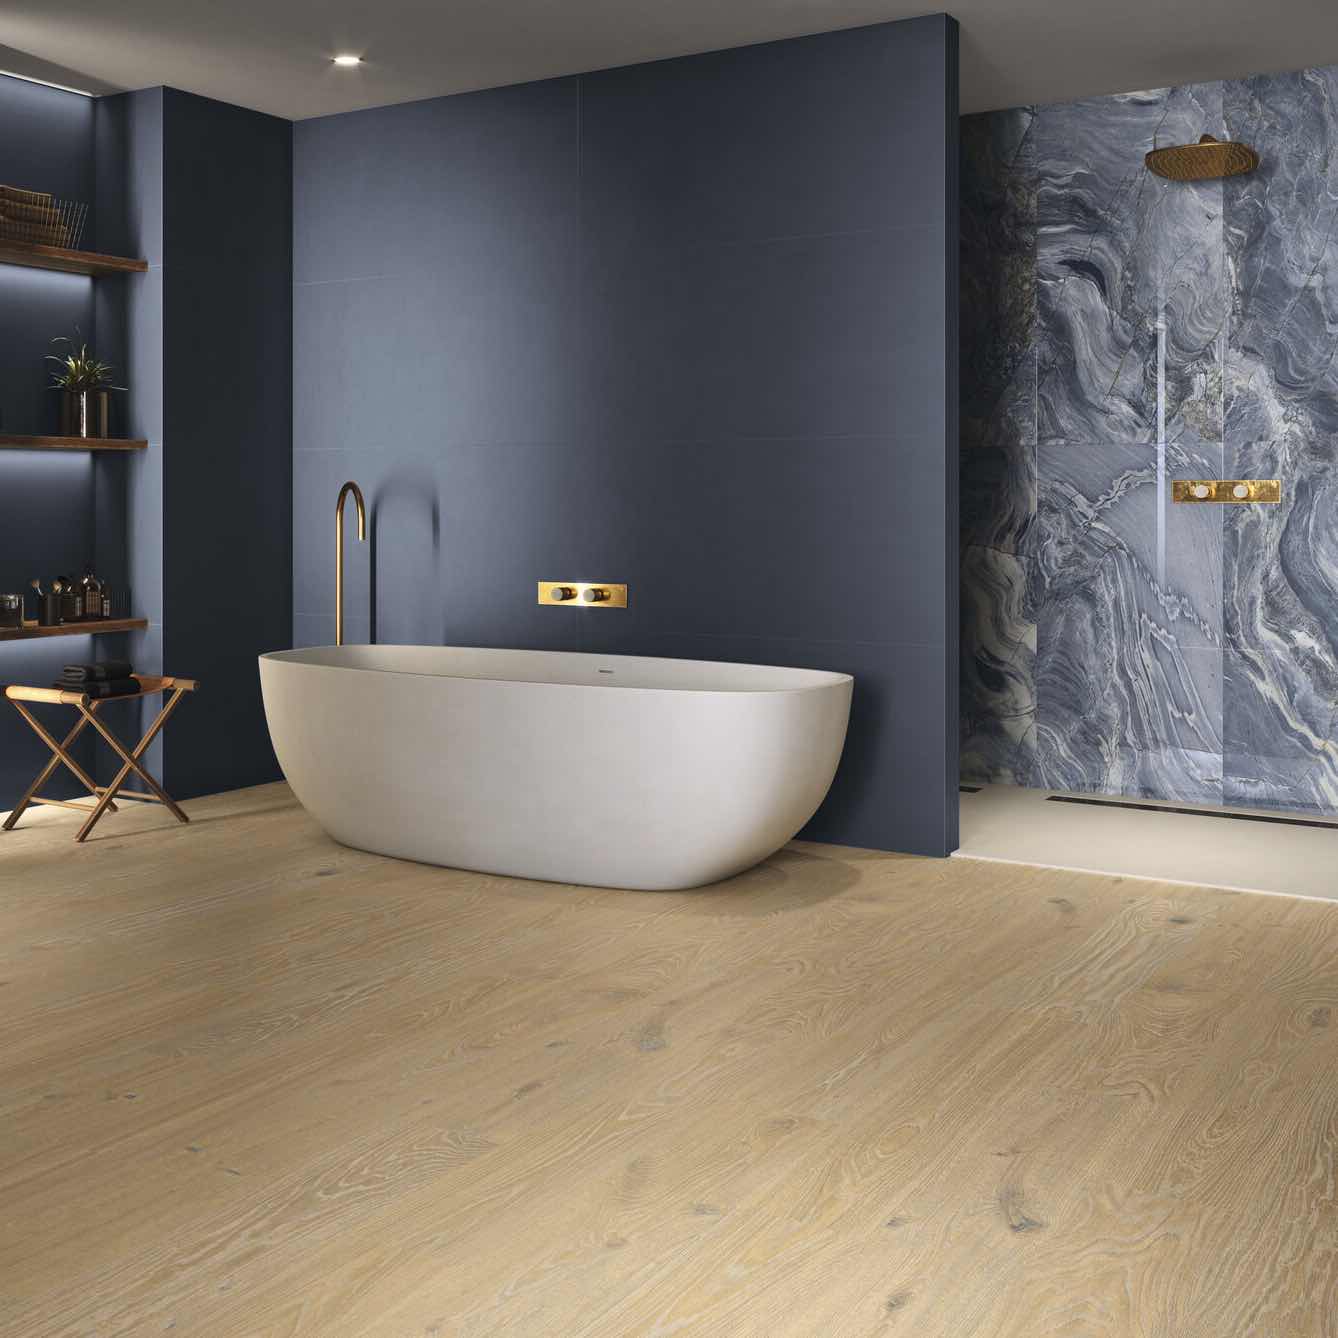 8 Great Ways To Use Wood Effect Tiles On Your Walls – Porcelain Superstore